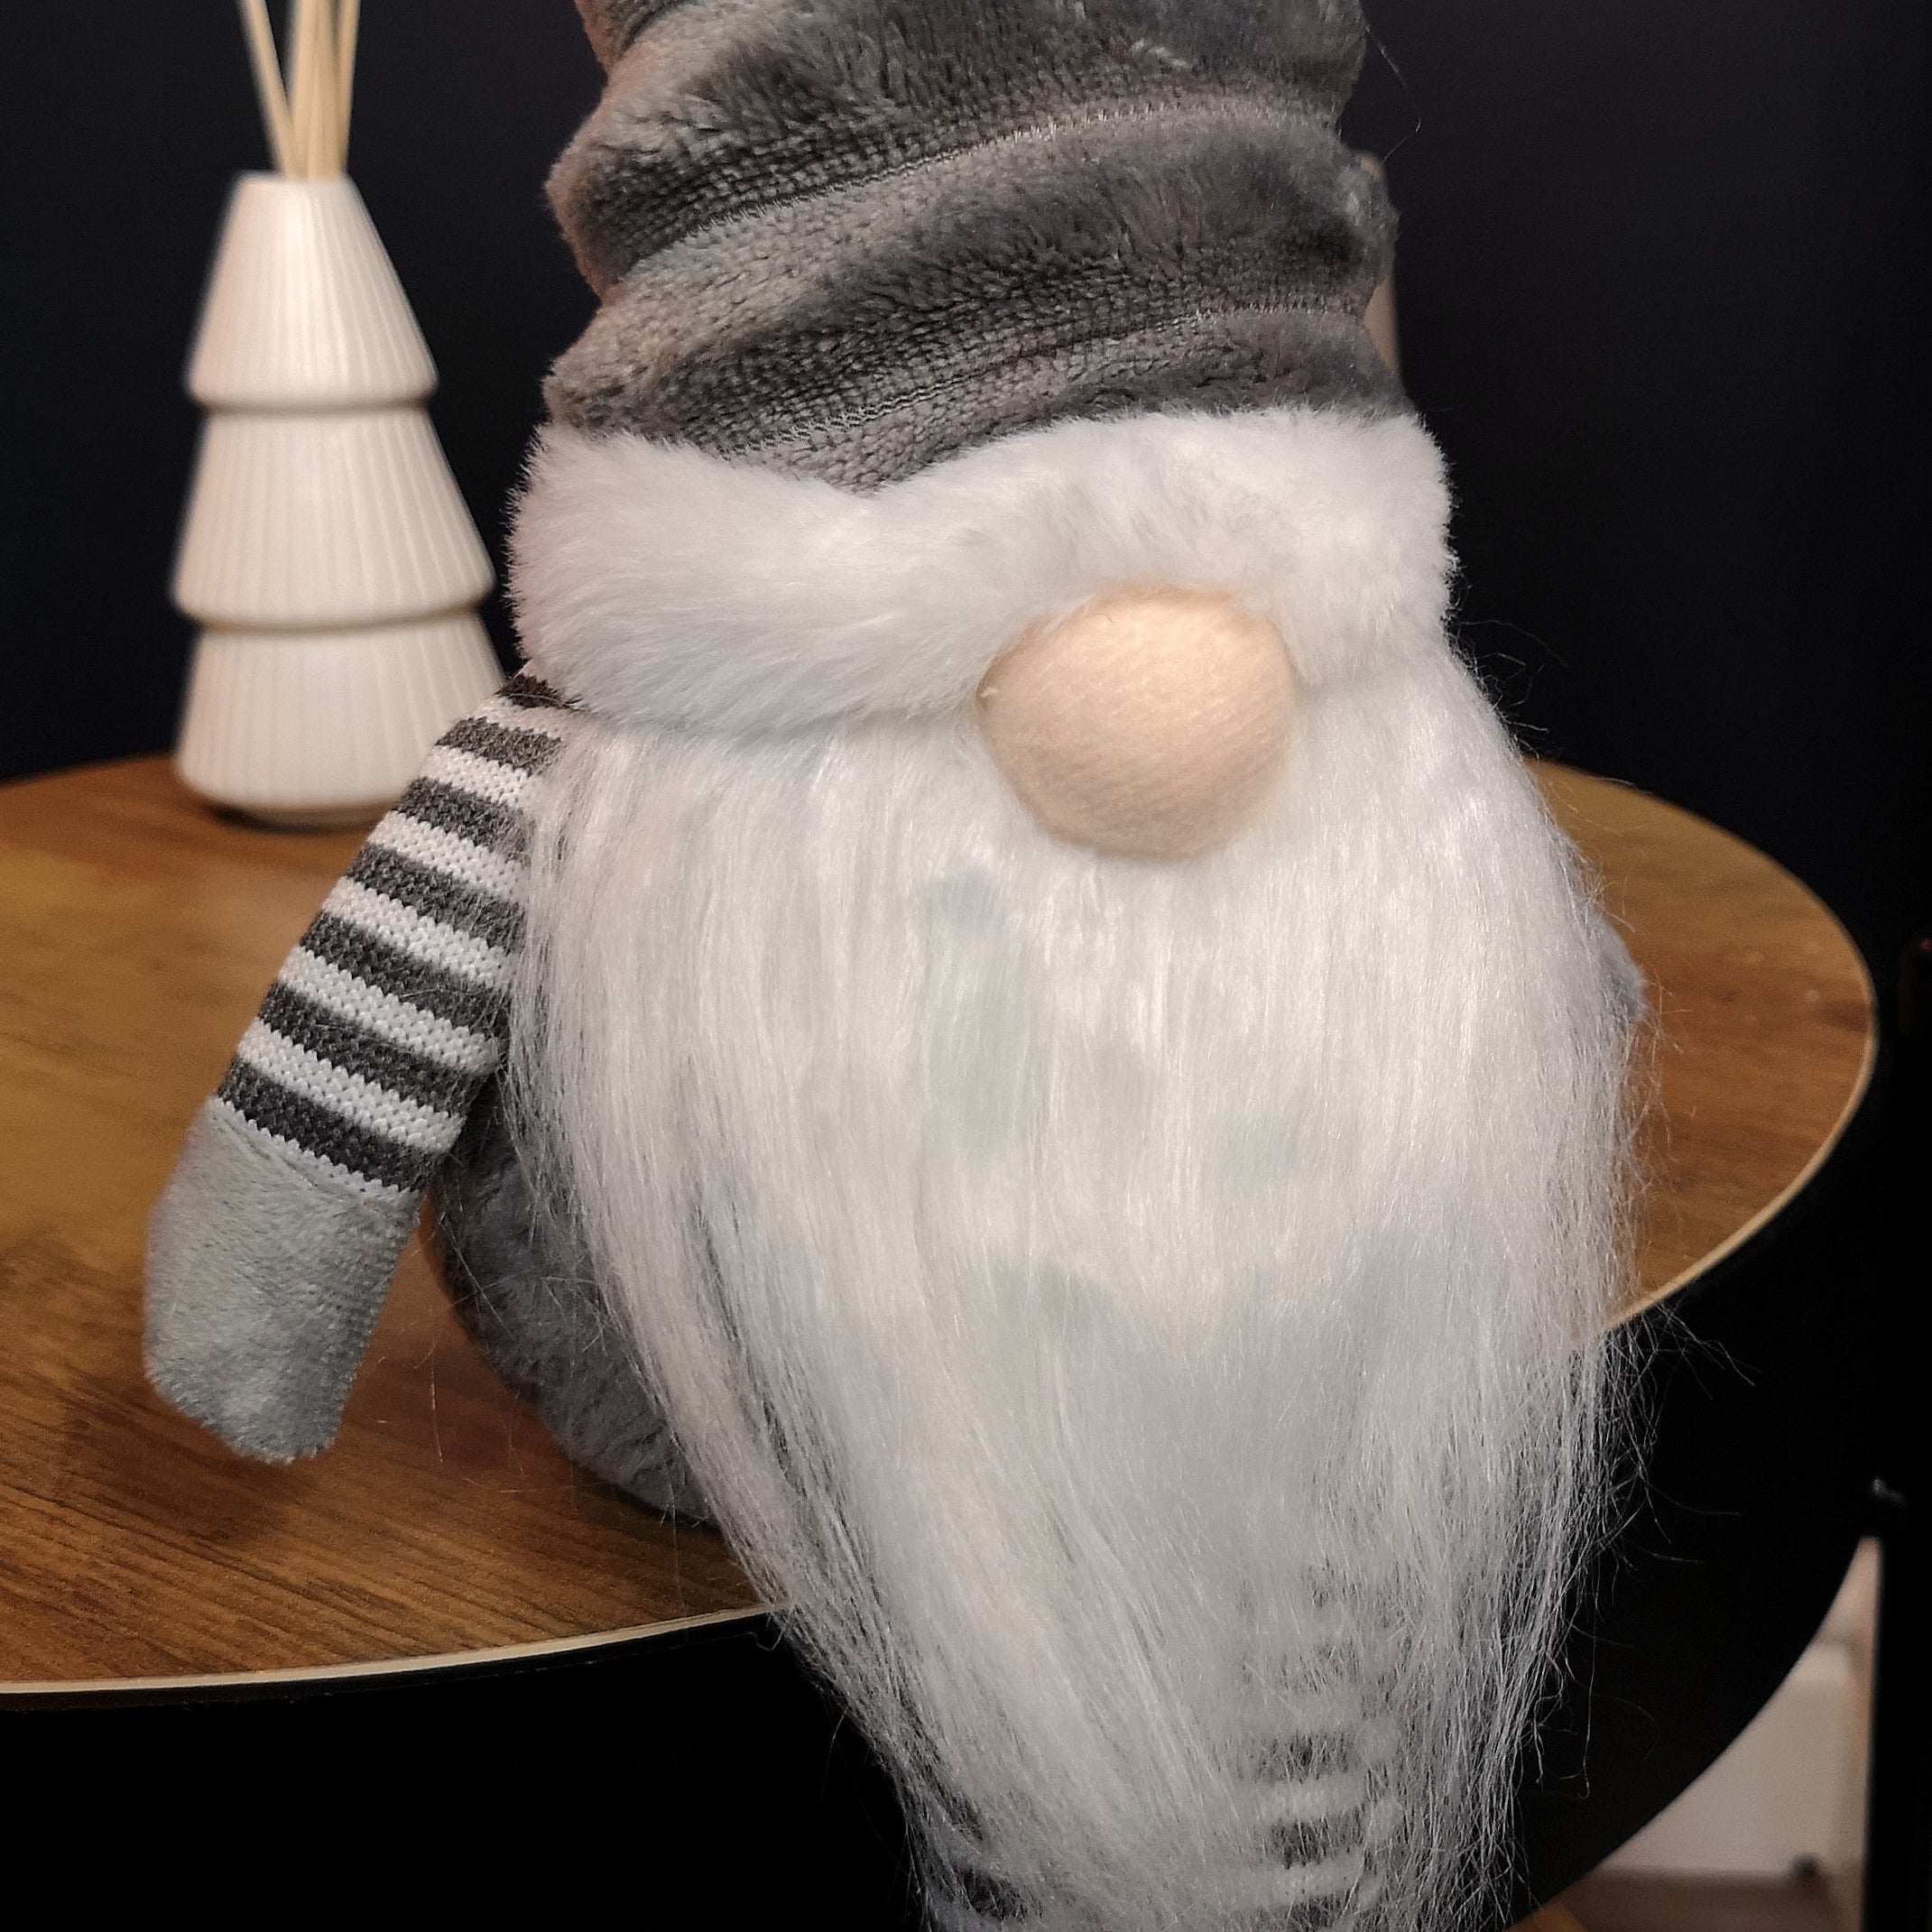 46cm Grey Plush Sitting Gonk Christmas Decoration with Stripey Dangly Legs